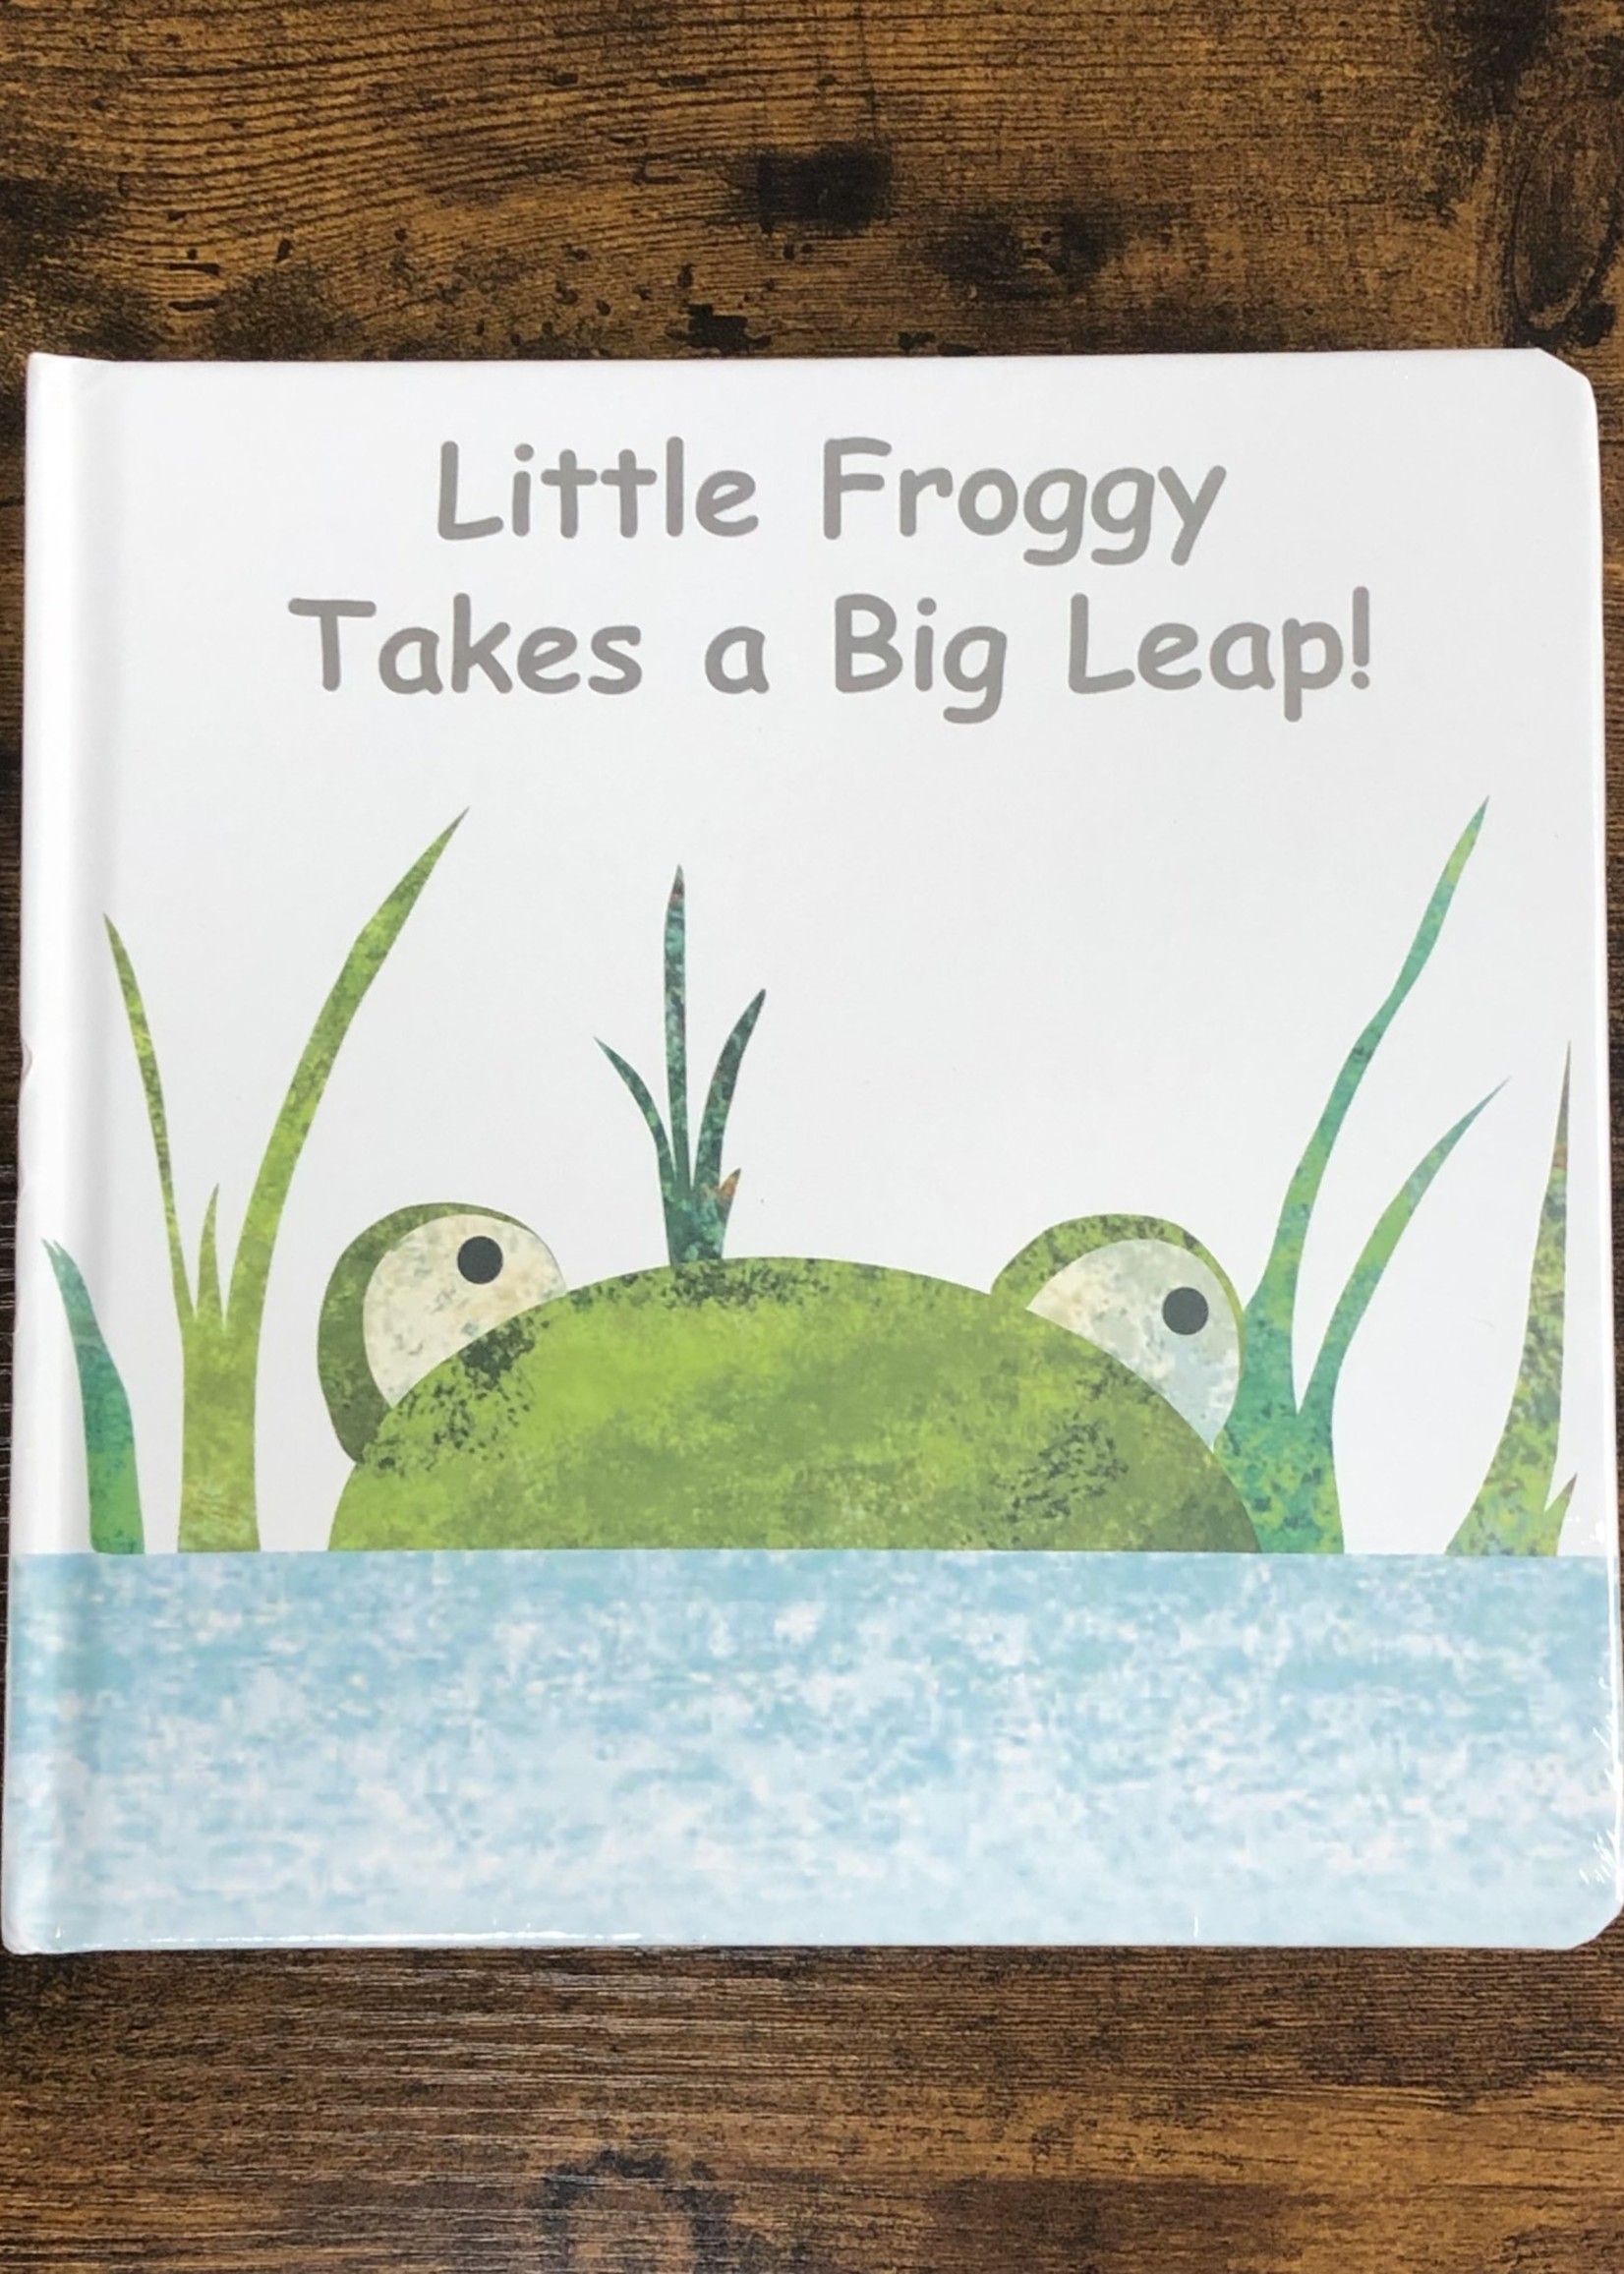 Book - Little Froggy Takes a Big Leap!